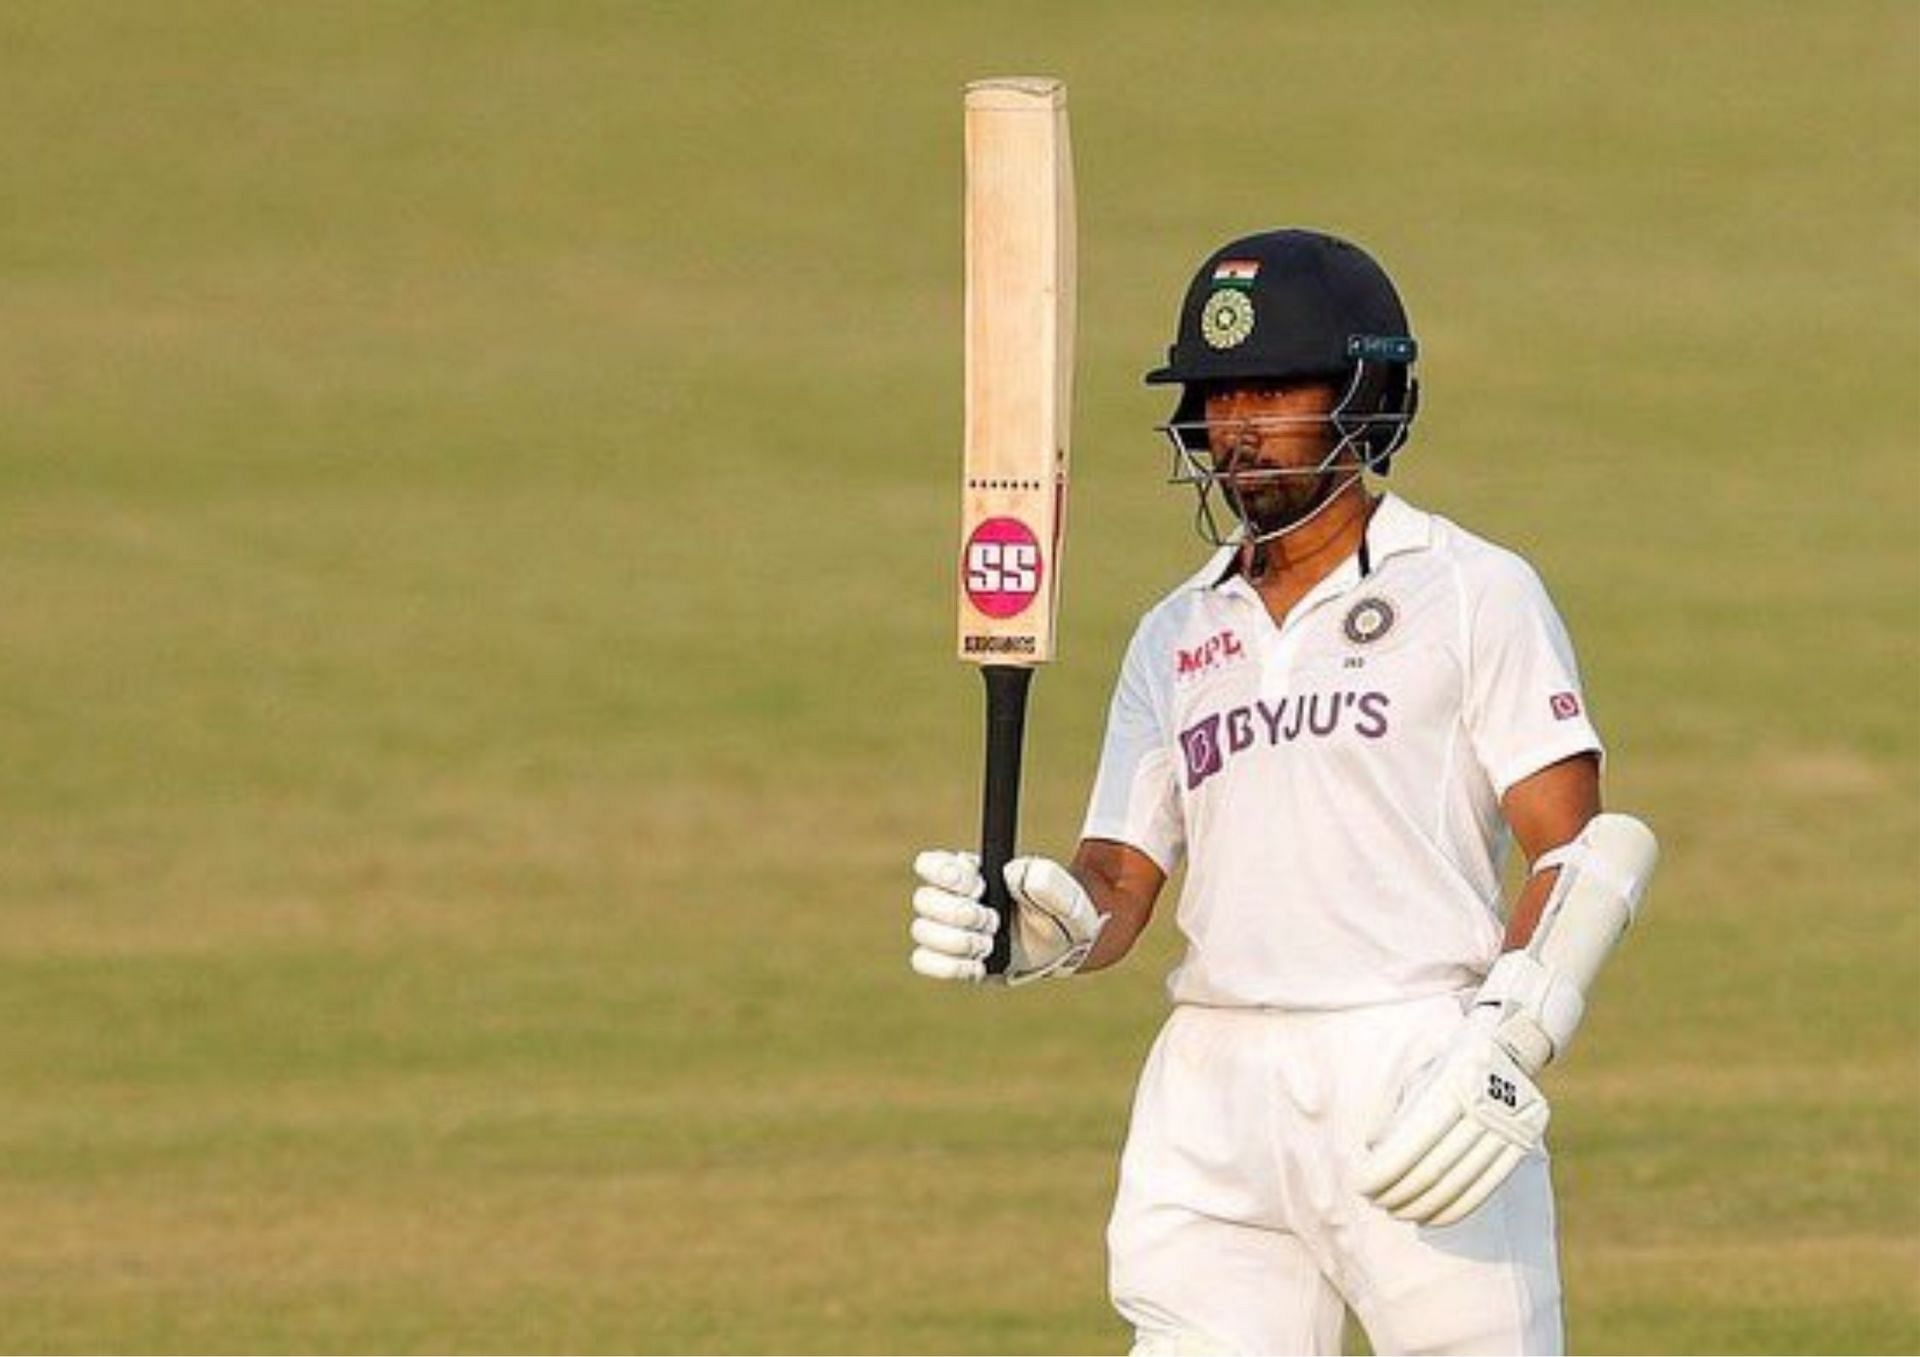 Wriddhiman Saha had a moment of nostalgia to share with his fans (Picture Credits: X/Wriddhiman Saha).